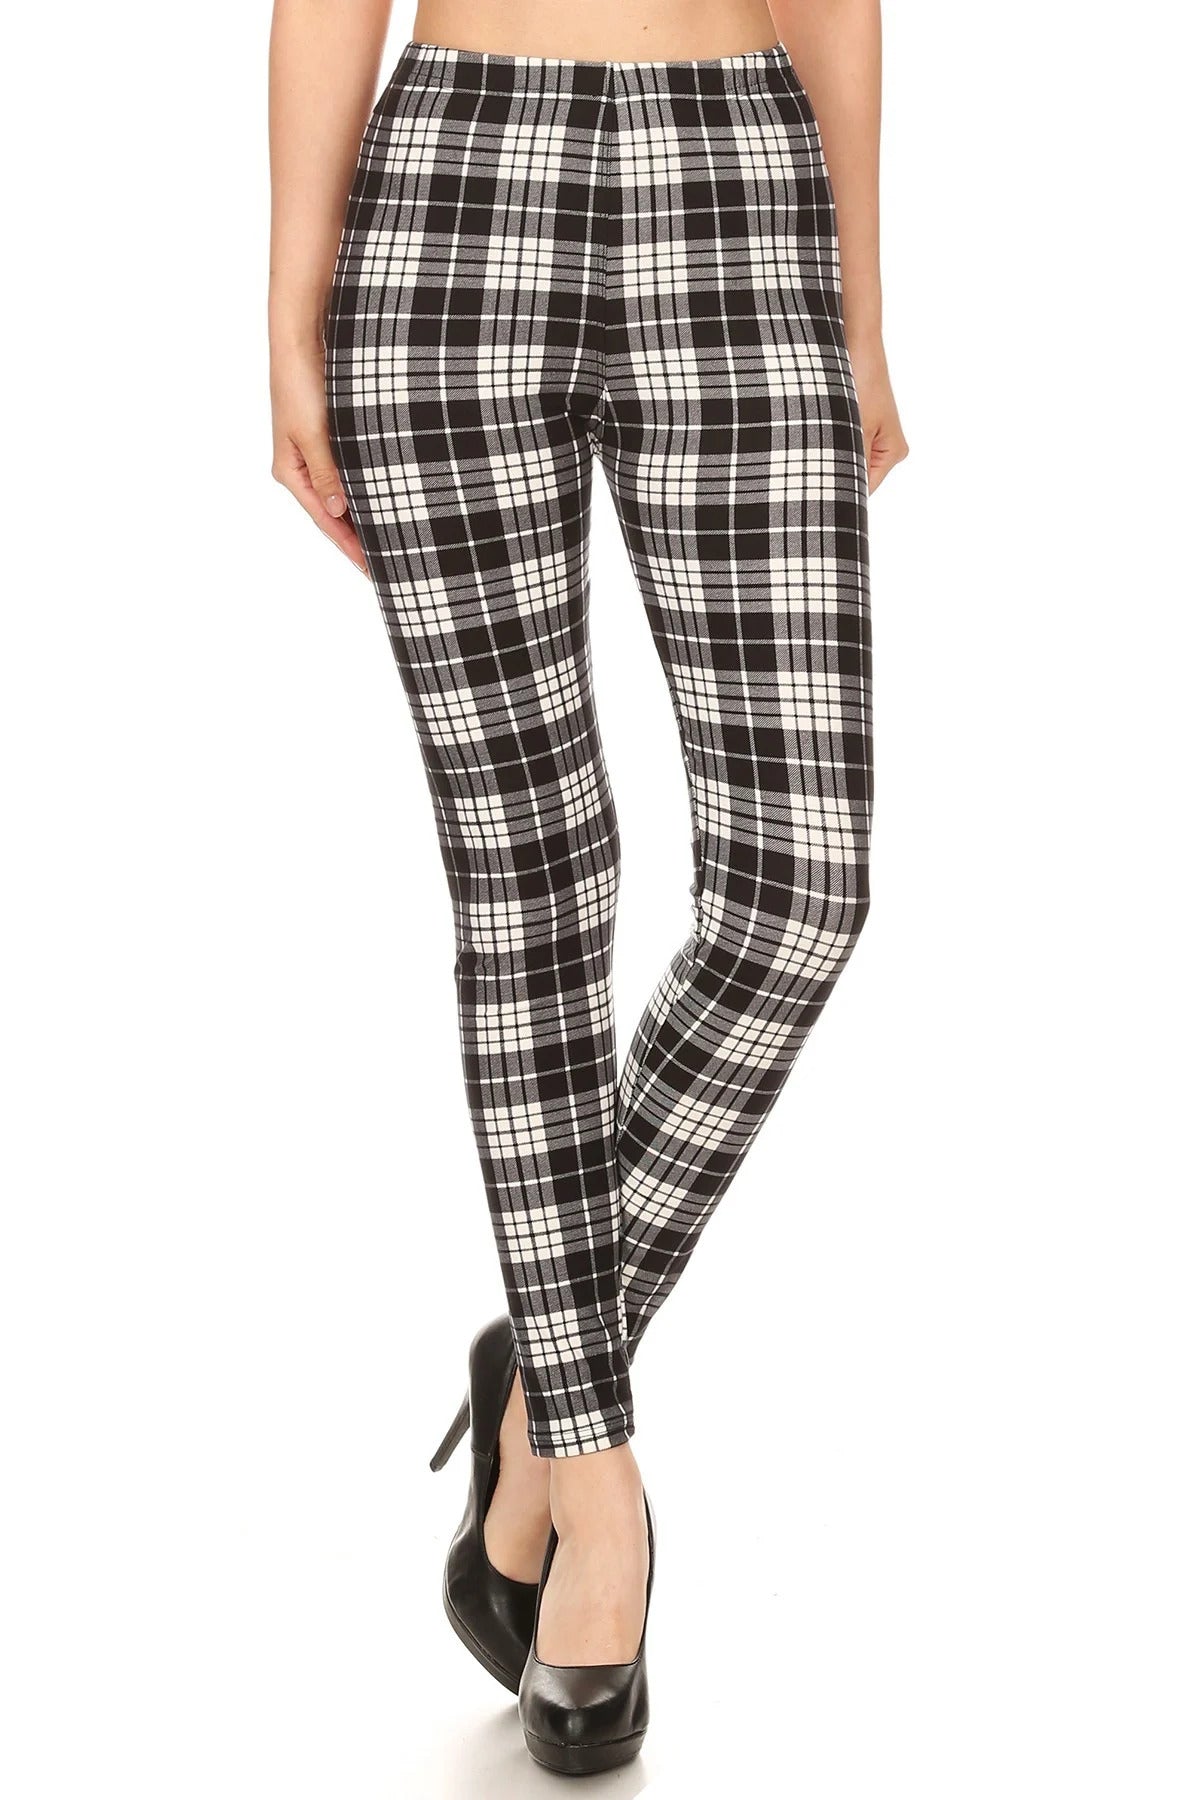 Os Plaid High Waisted Leggings In A Fitted Style, With An Elastic Waistband